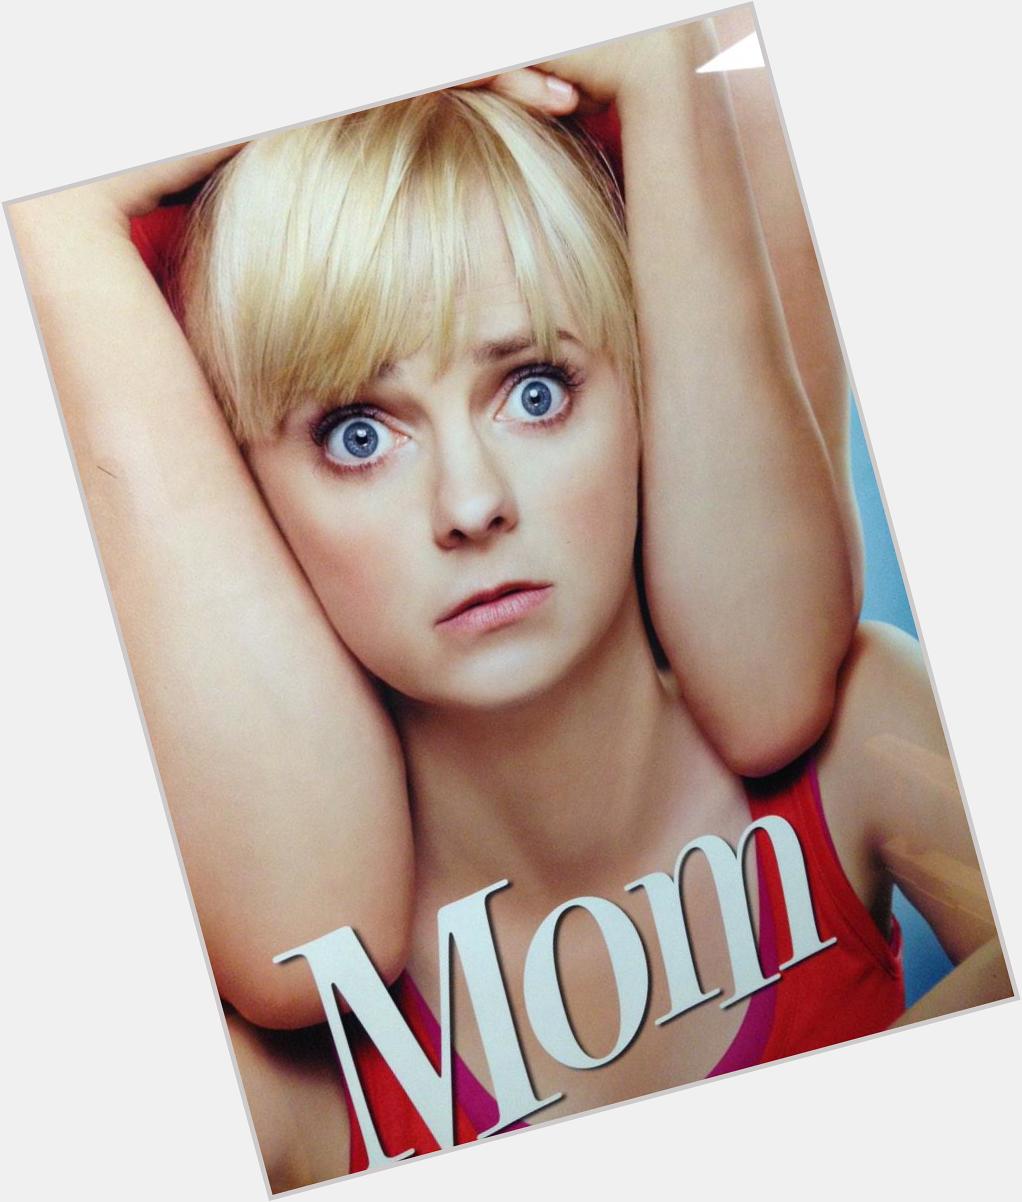 Happy Birthday today to Anna Faris of MOM.. she is adorable in that show!  